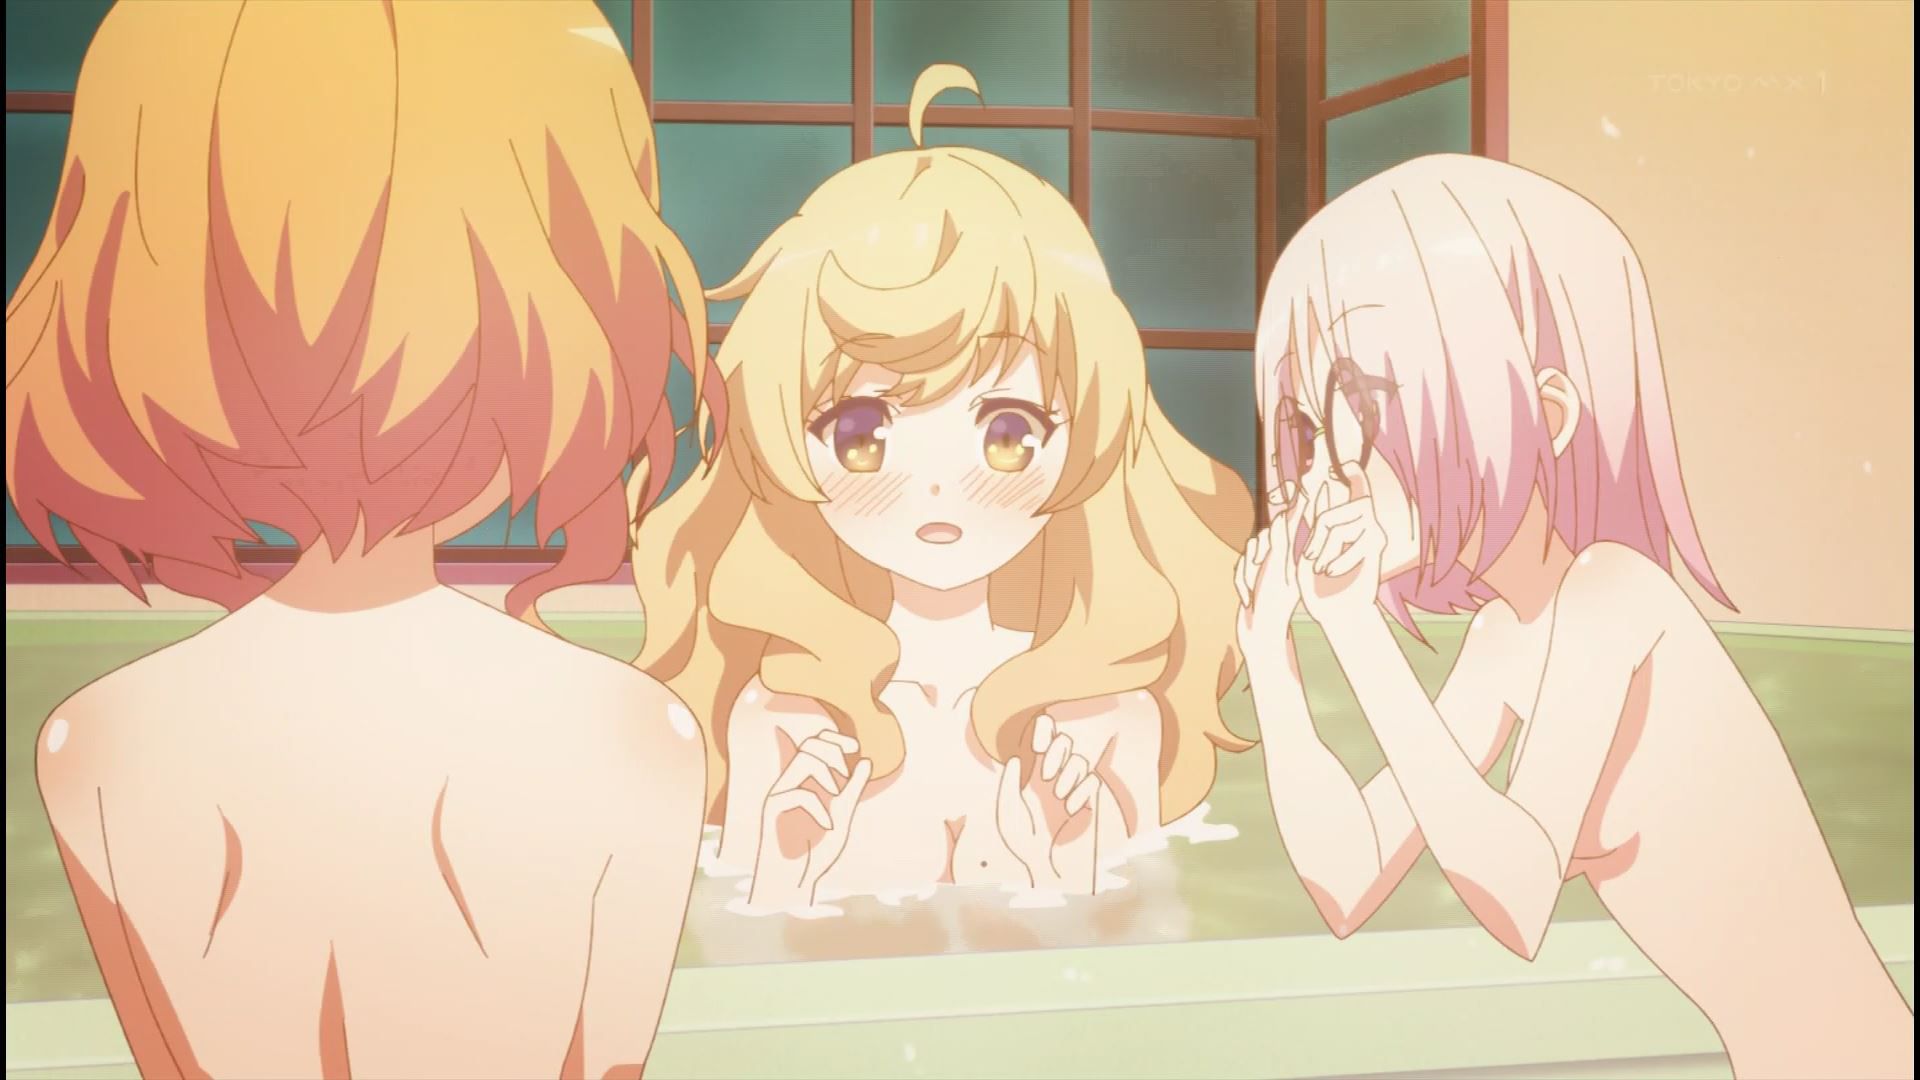 Erotic breasts and naked figure in erotic bathing scene of girls in the anime [Music girl] 2 story! 19